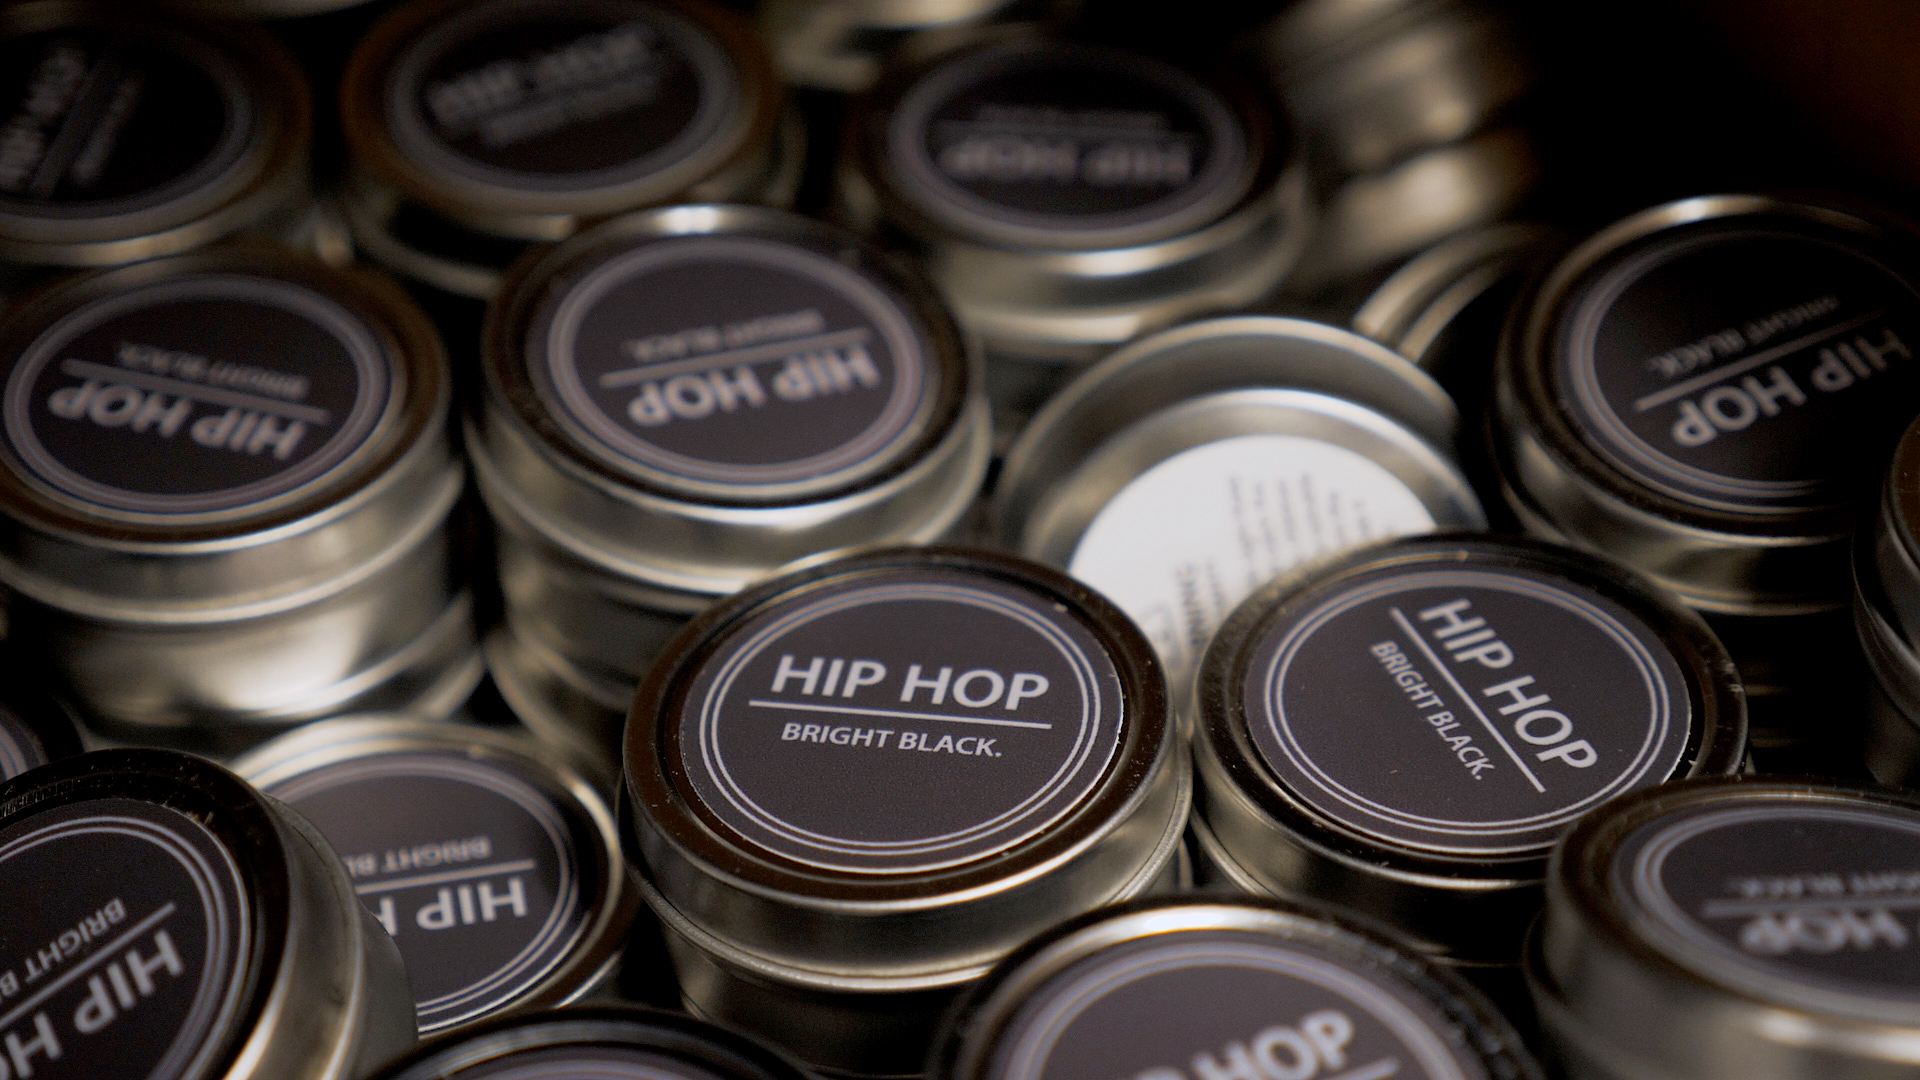 A bunch of candle tins with a label that says Hip Hop.